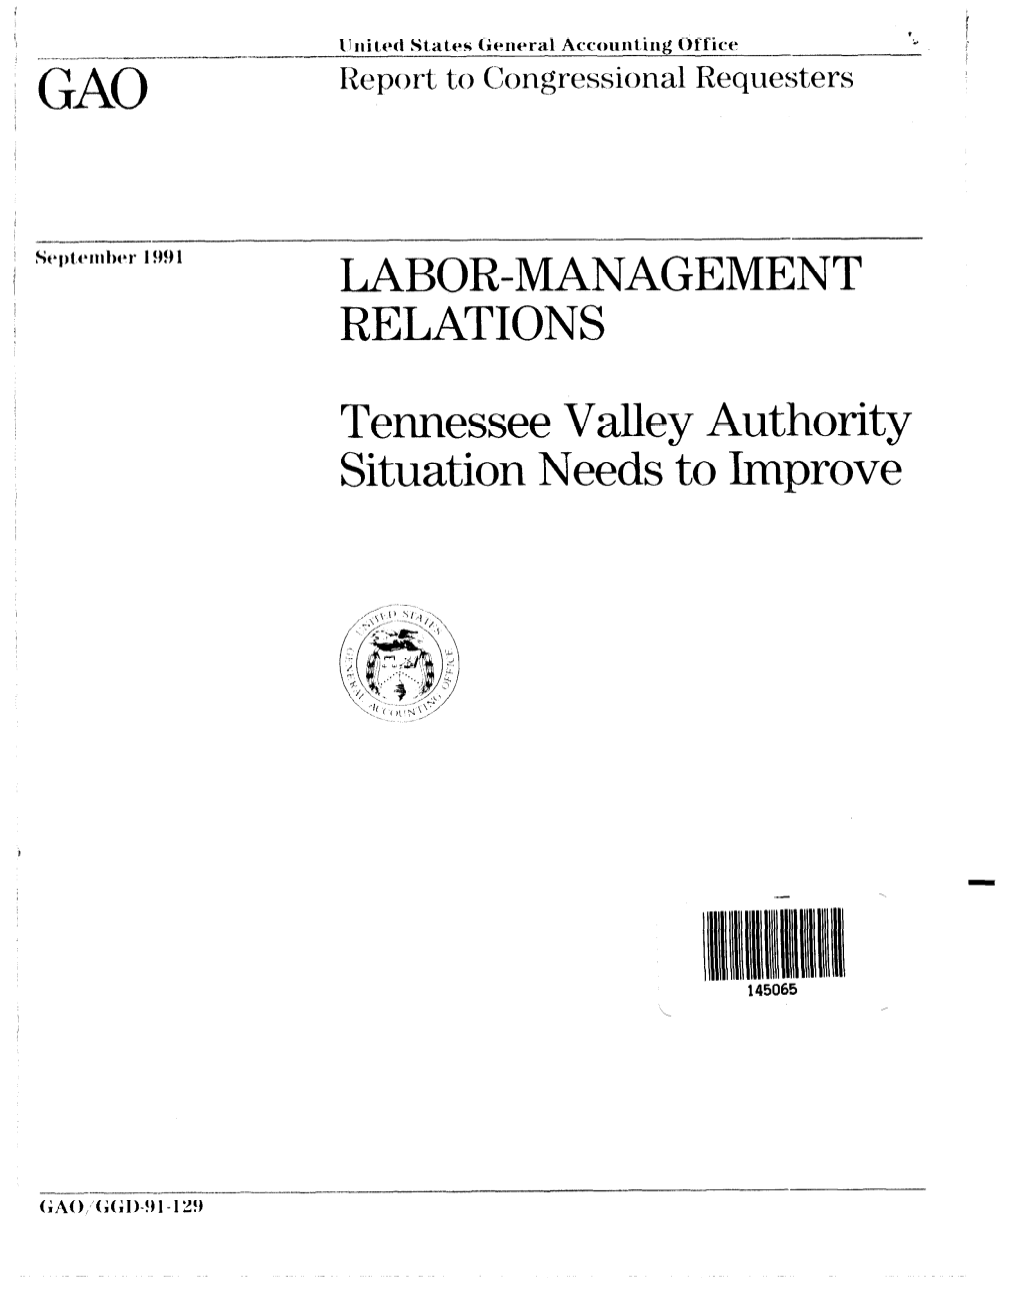 GGD-91-129 Labor-Management Relations: Tennessee Valley